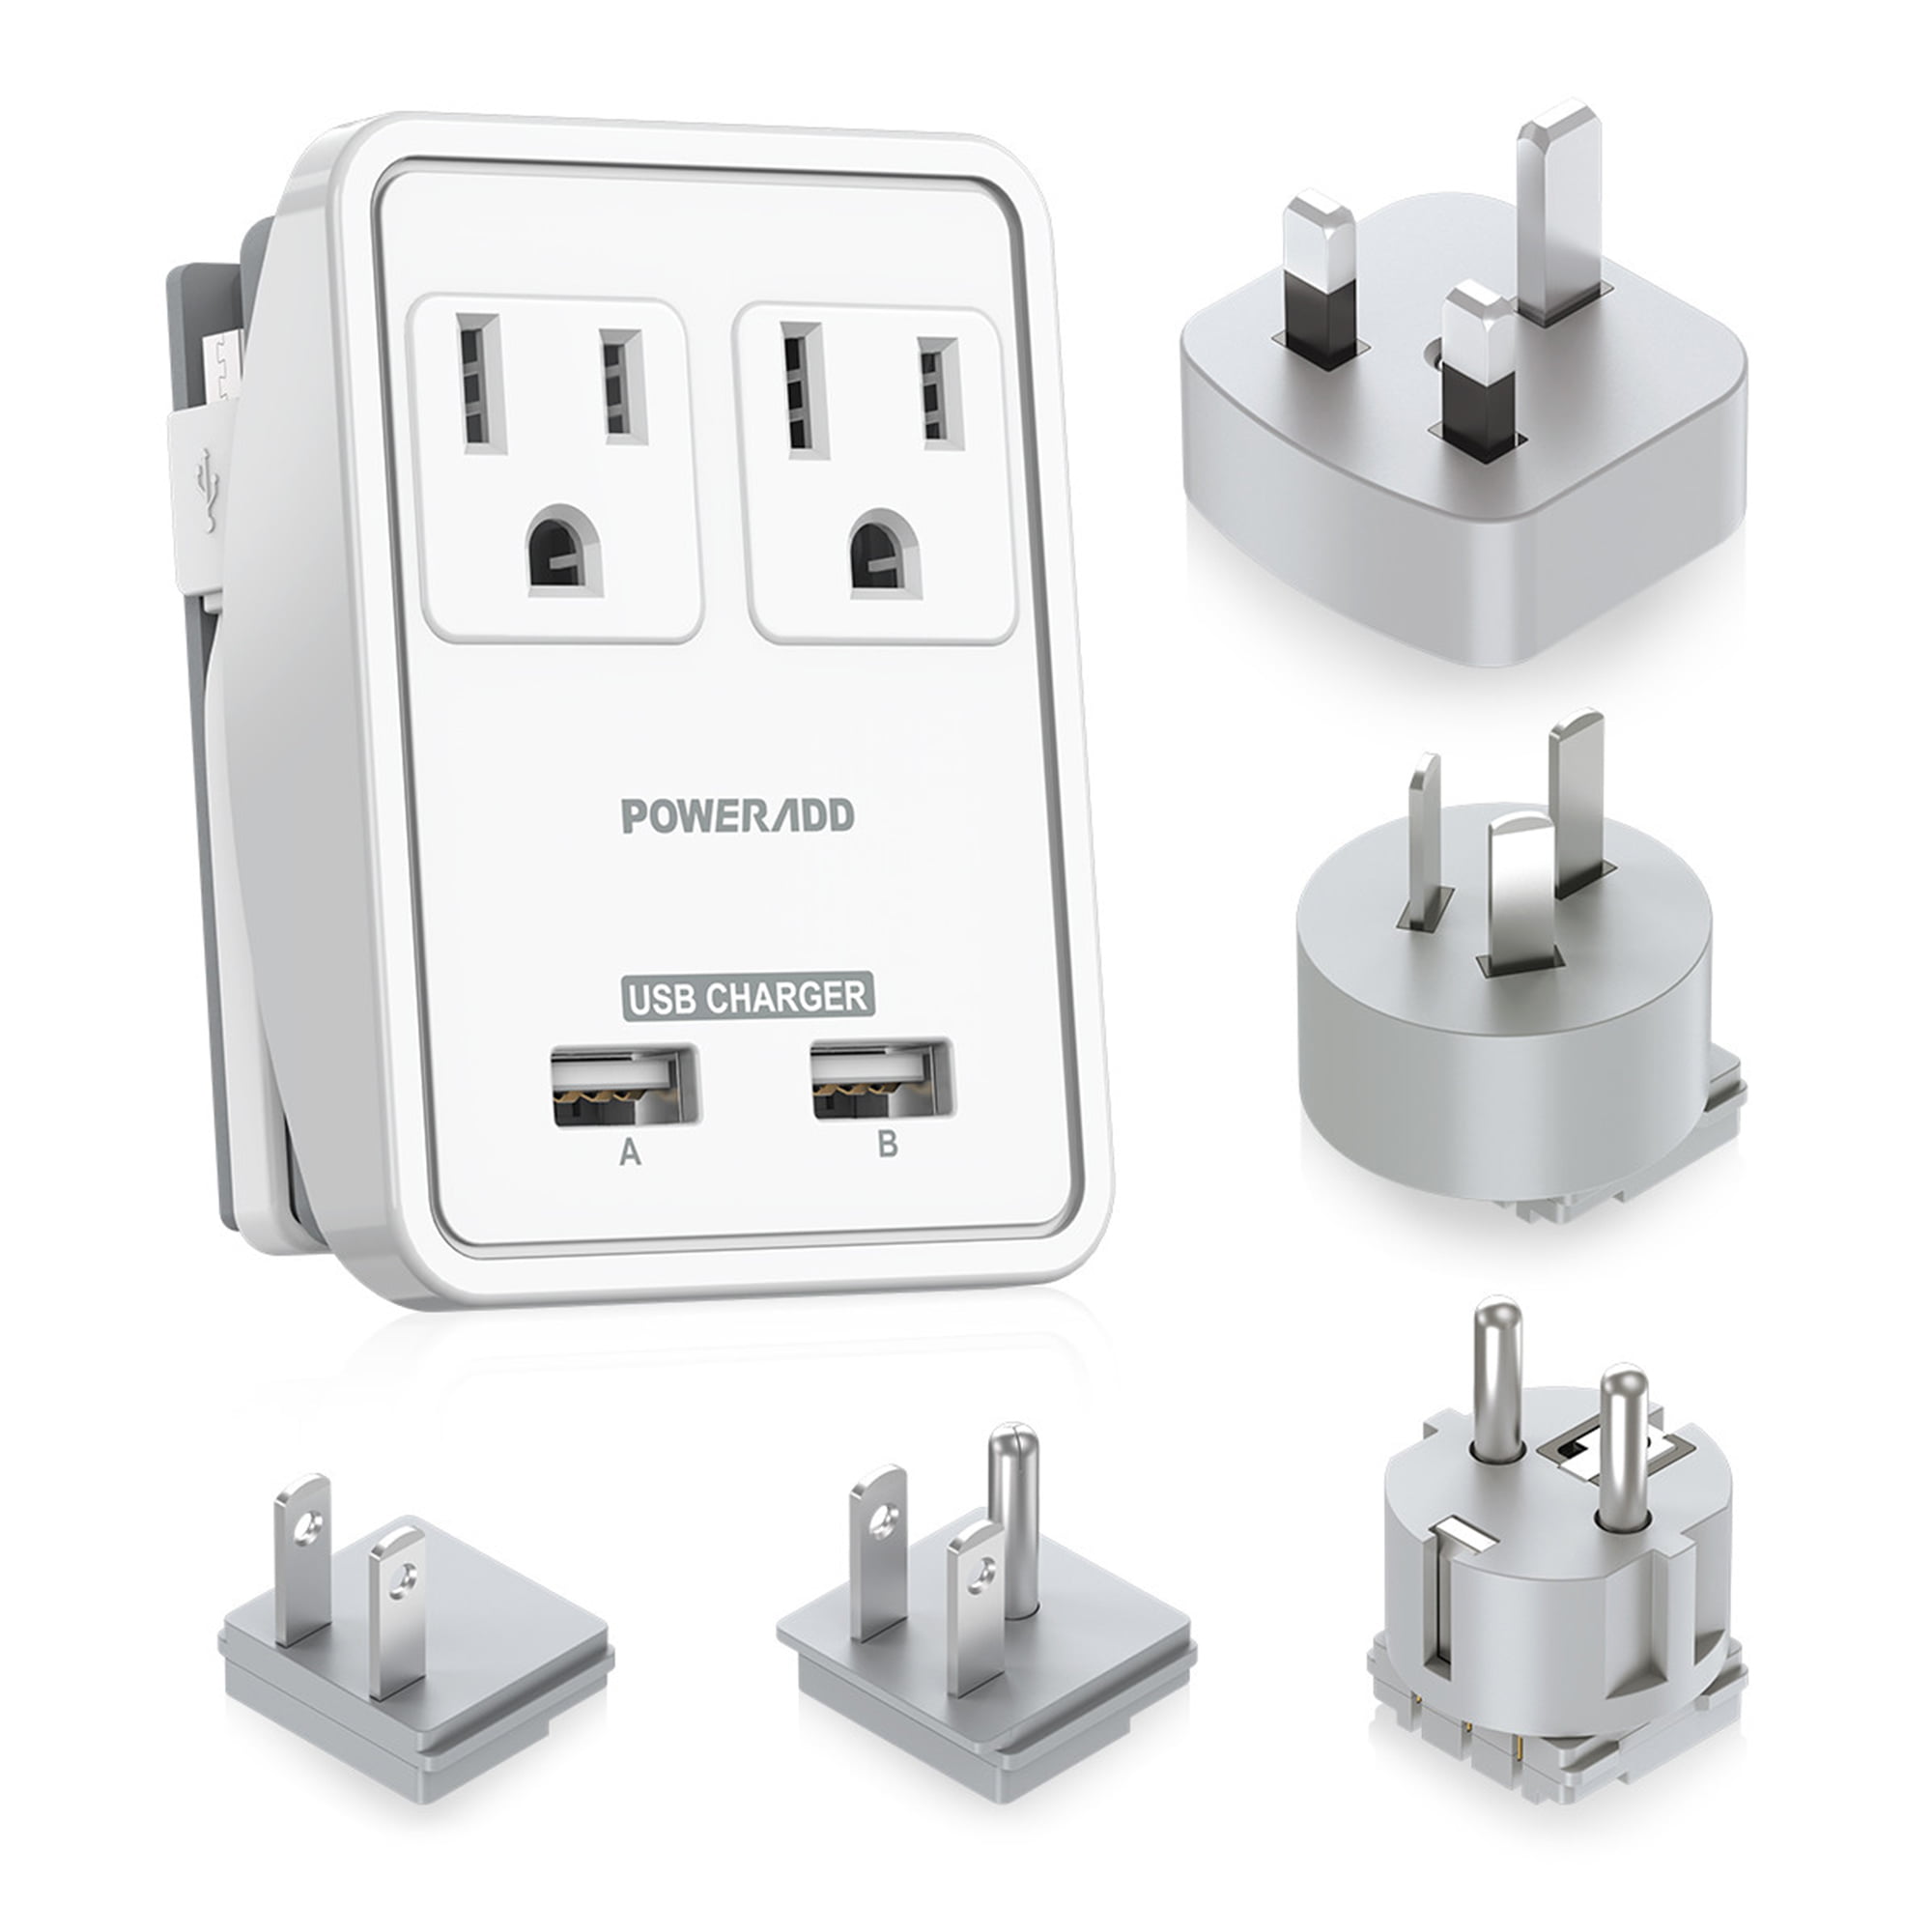 Dual USB Port Electric Wall Charger Station Socket Adapter Power Outlet EU Plug 